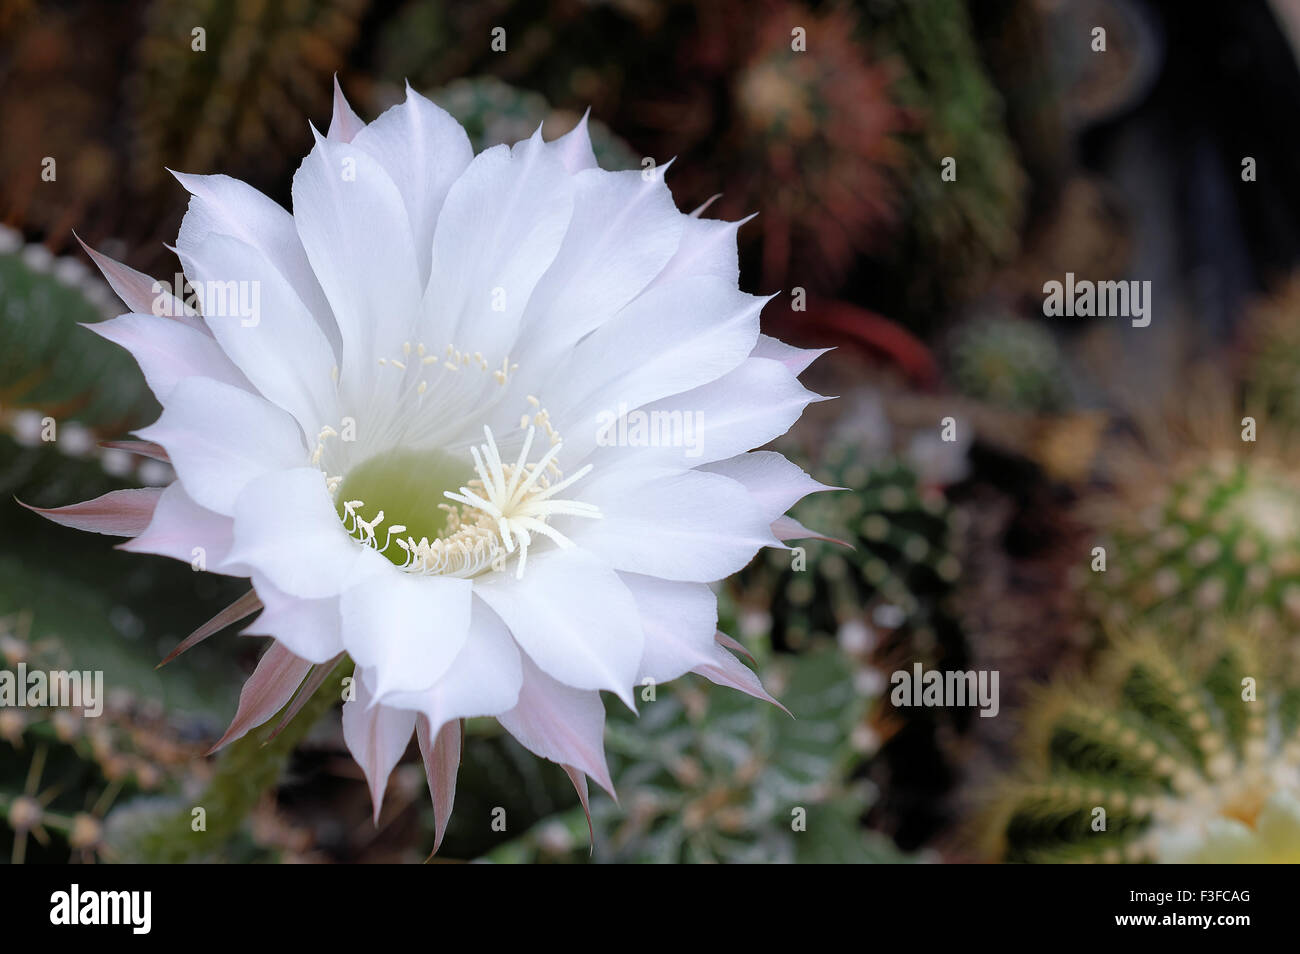 Blooming cactus (Echinopsis sp.) with white flower Stock Photo